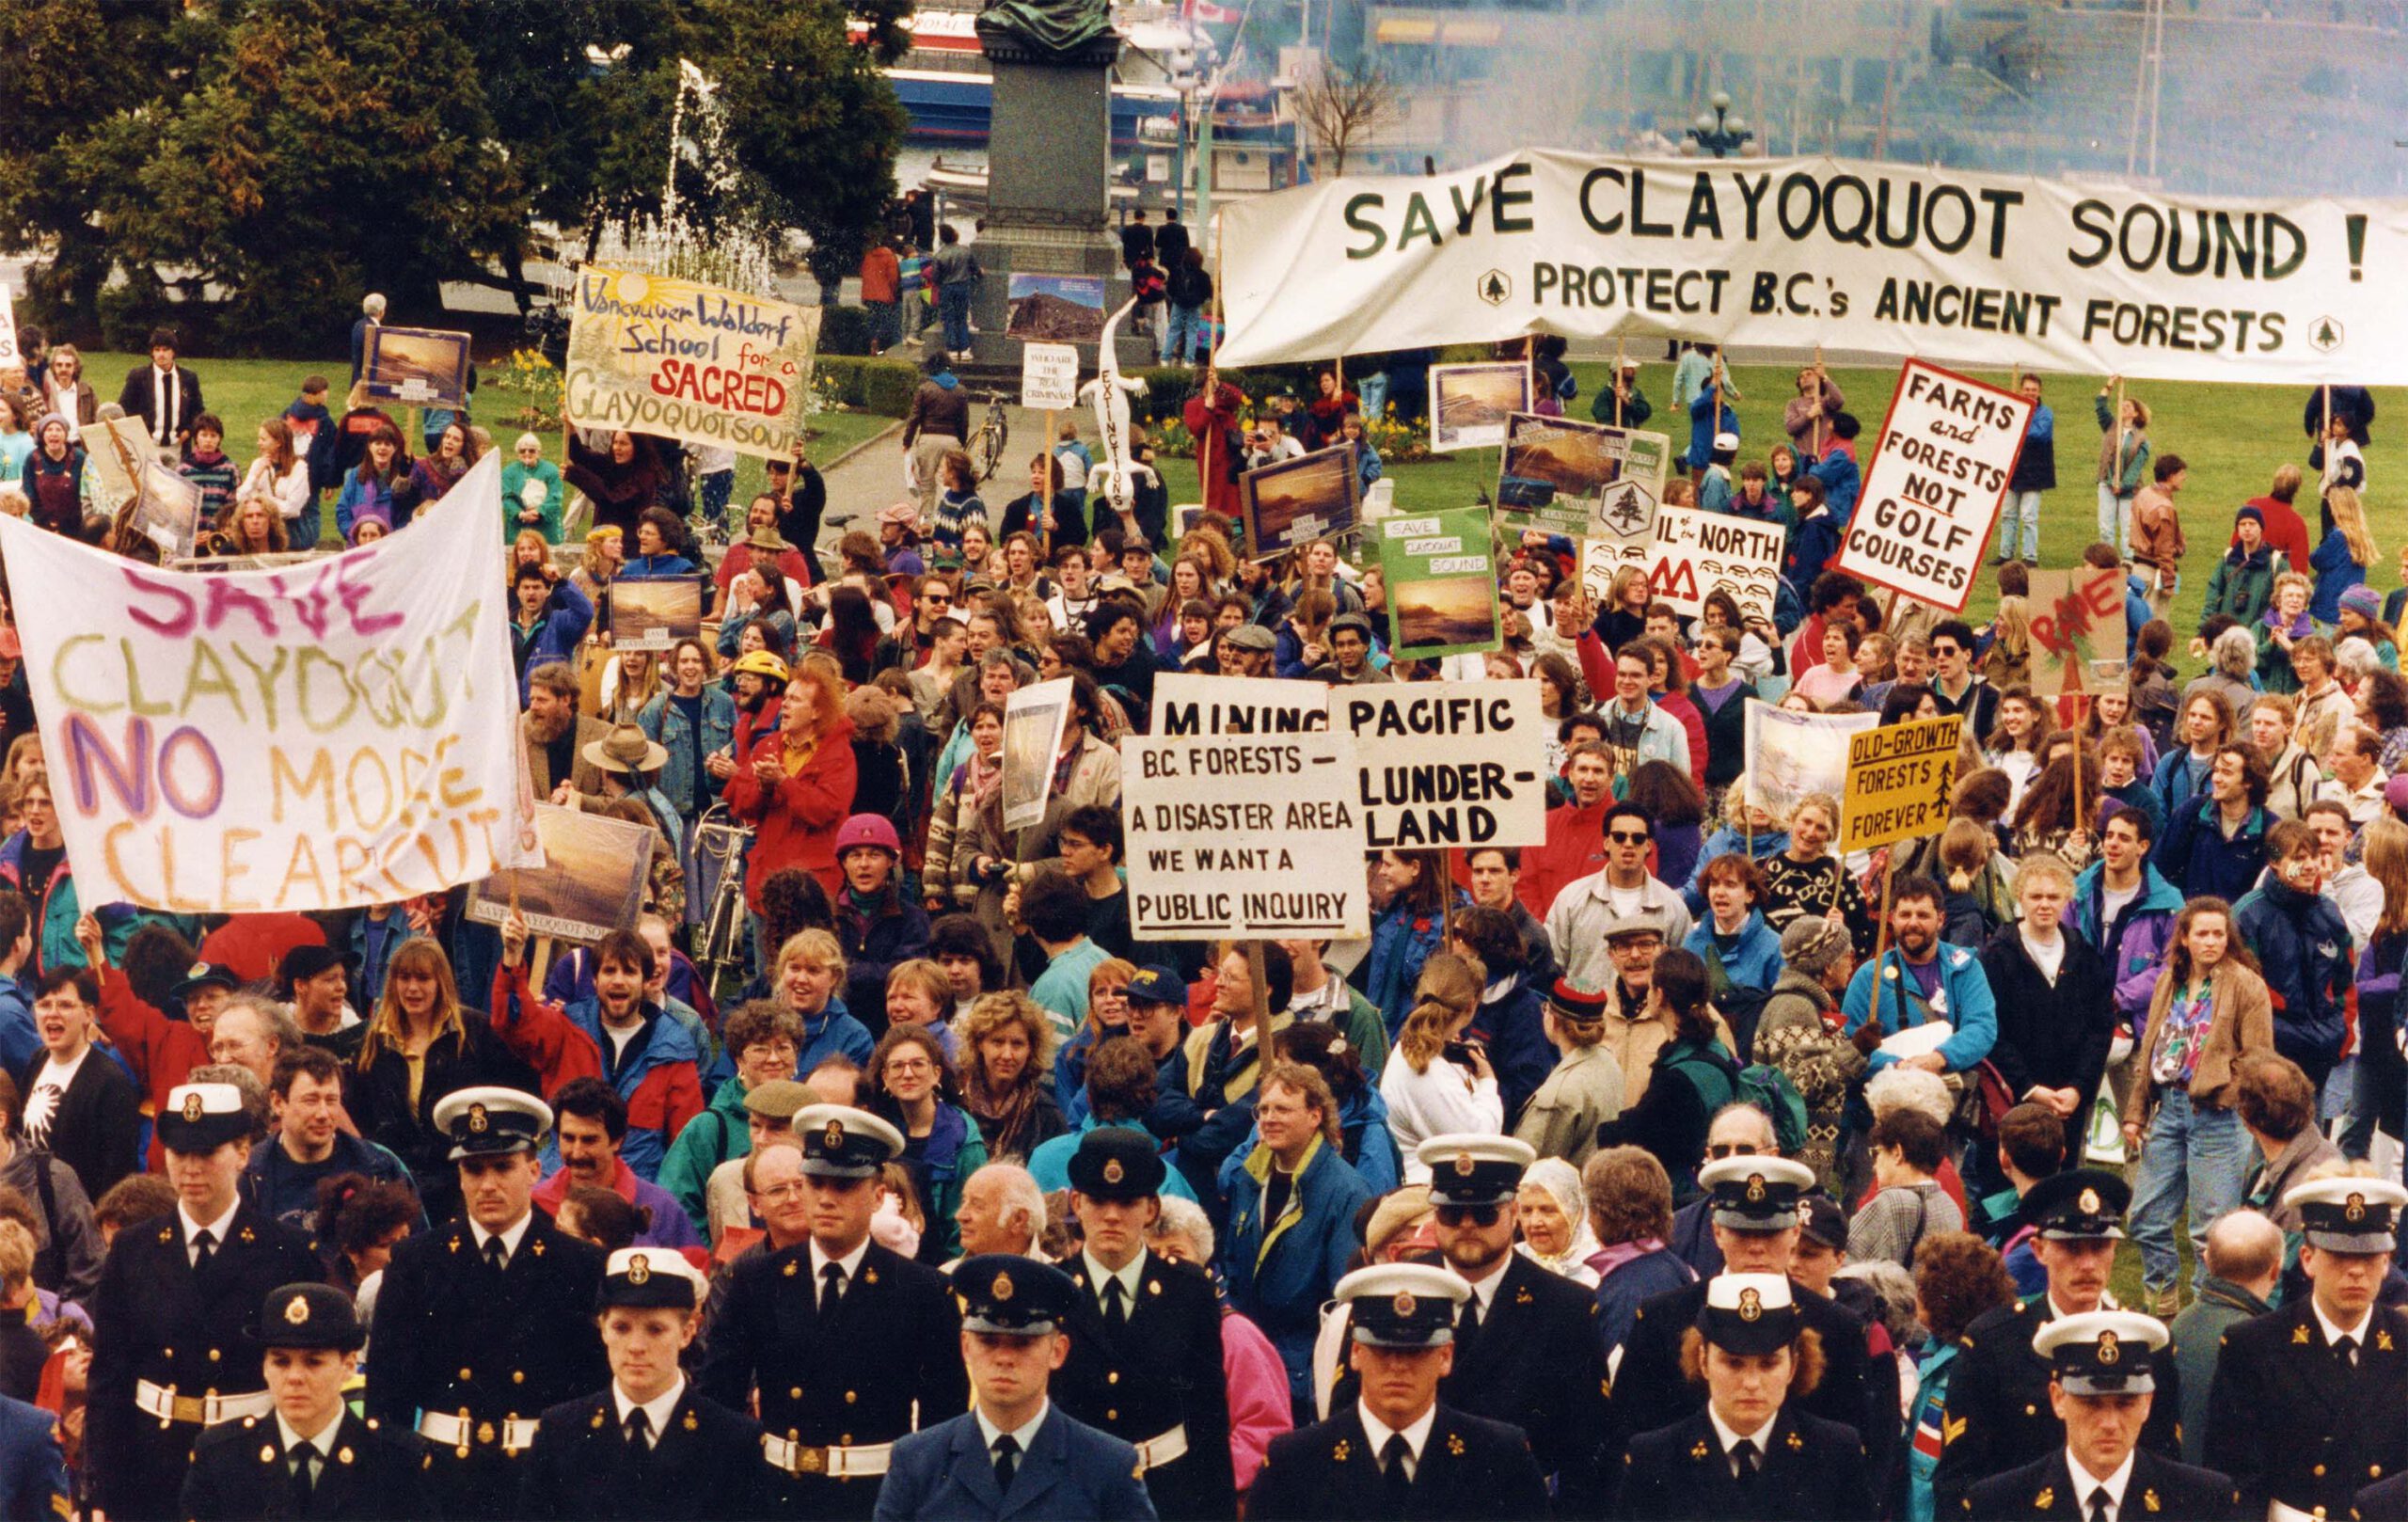 An image from 1993 showing protestors with signs to ask for the protection of Clayoquot sound